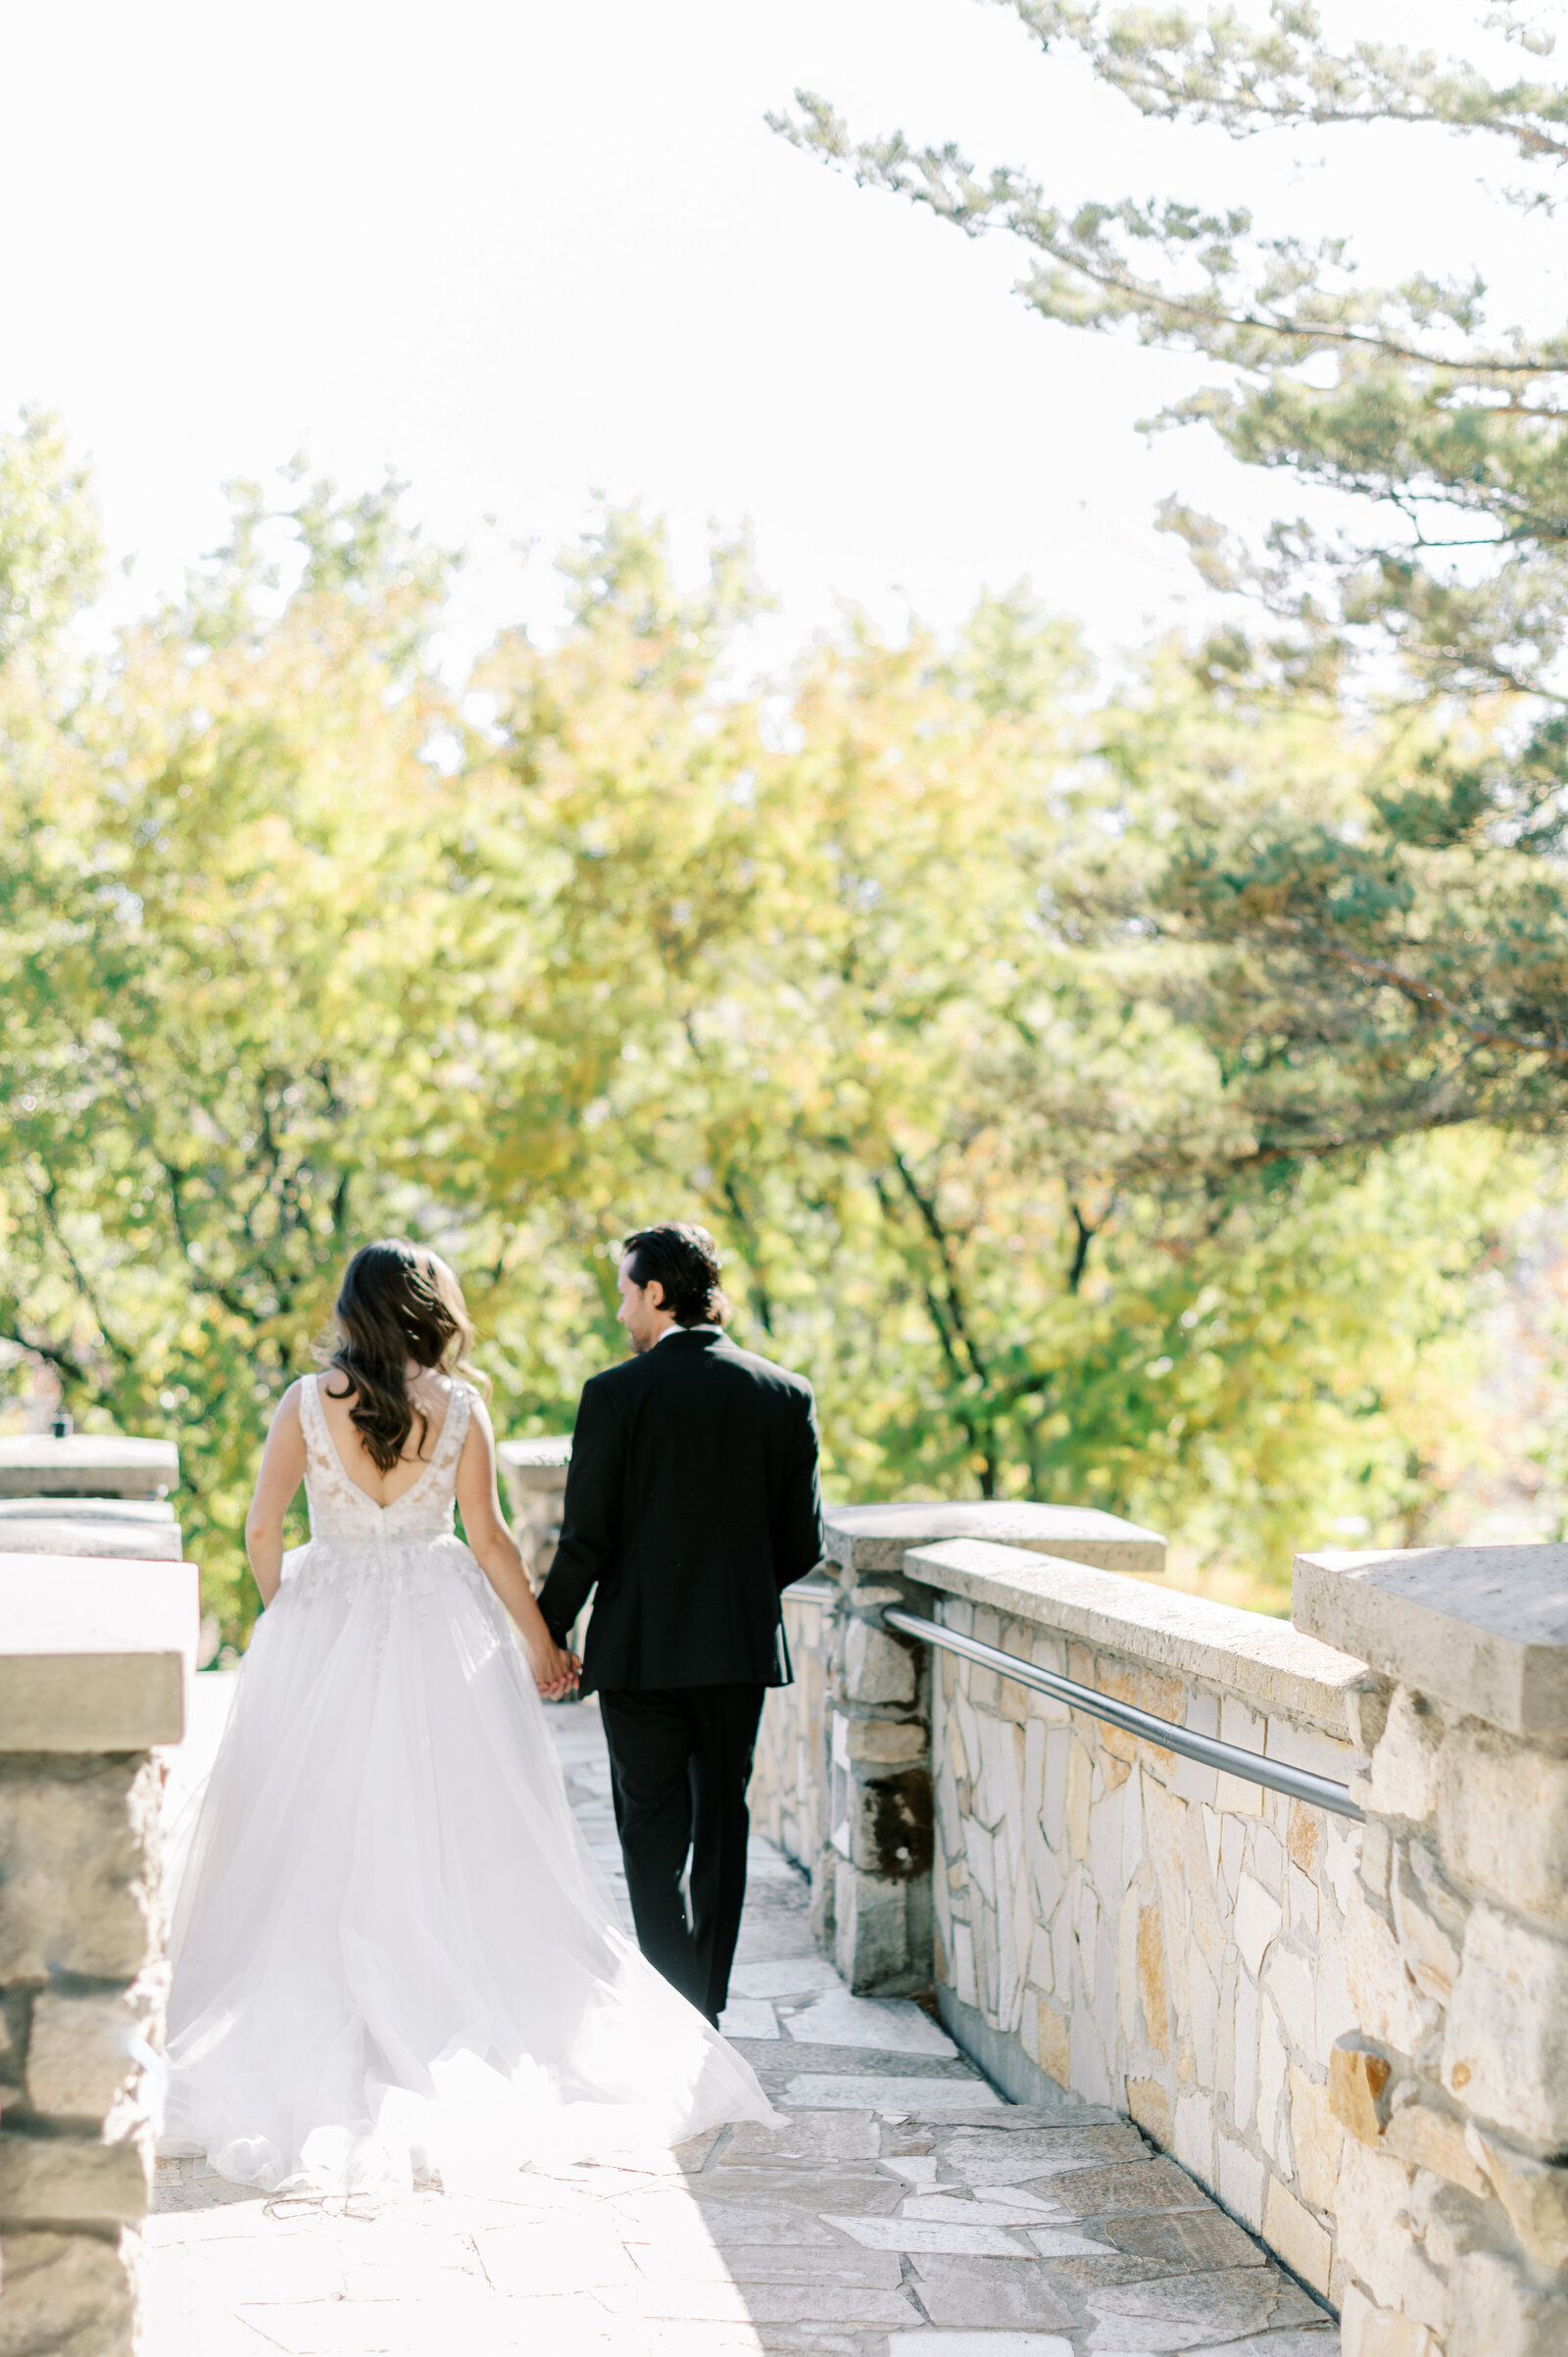 Boise wedding photography at Stone Crossing of bride and groom walking across the bridge